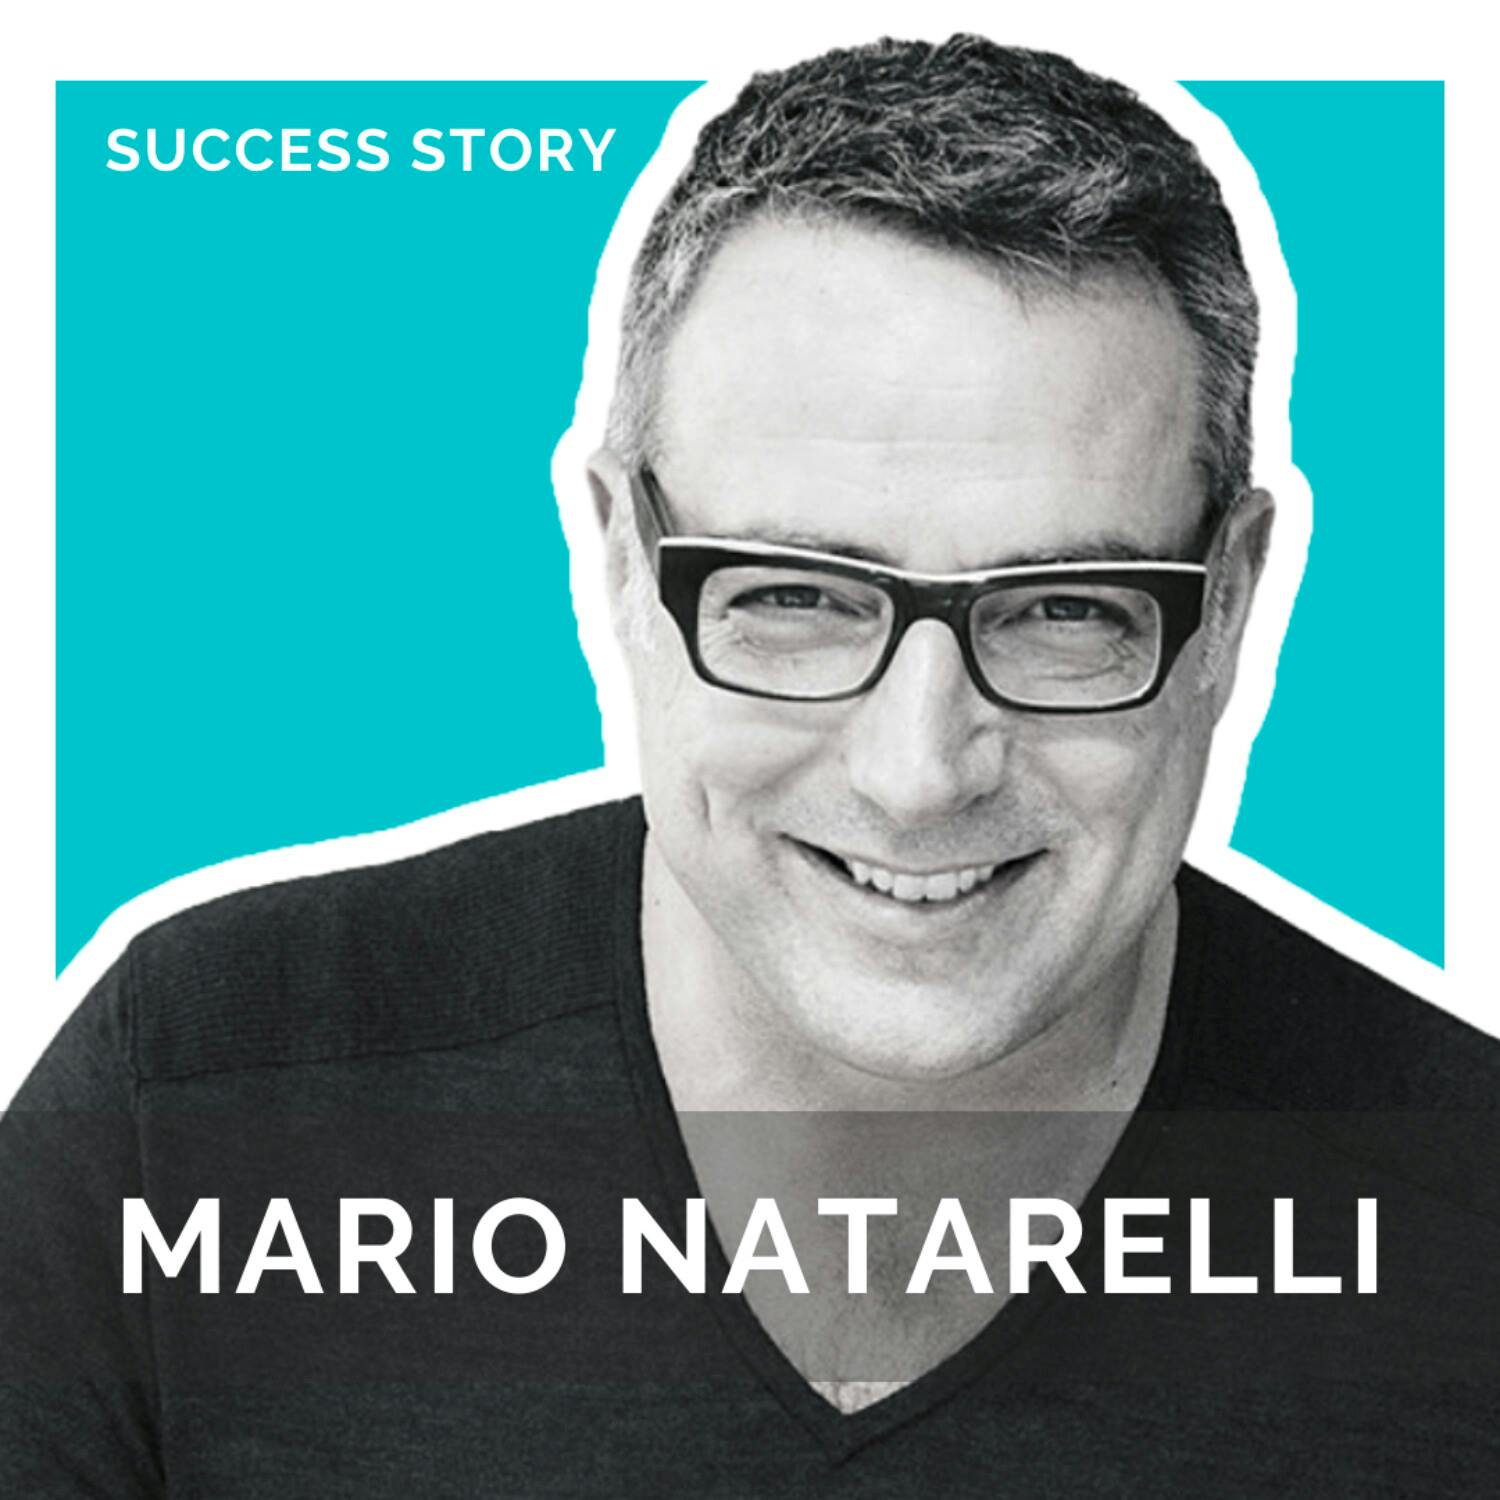 Mario Natarelli, Managing Partner at MBLM | How Brand Intimacy Can Make or Break Your Business